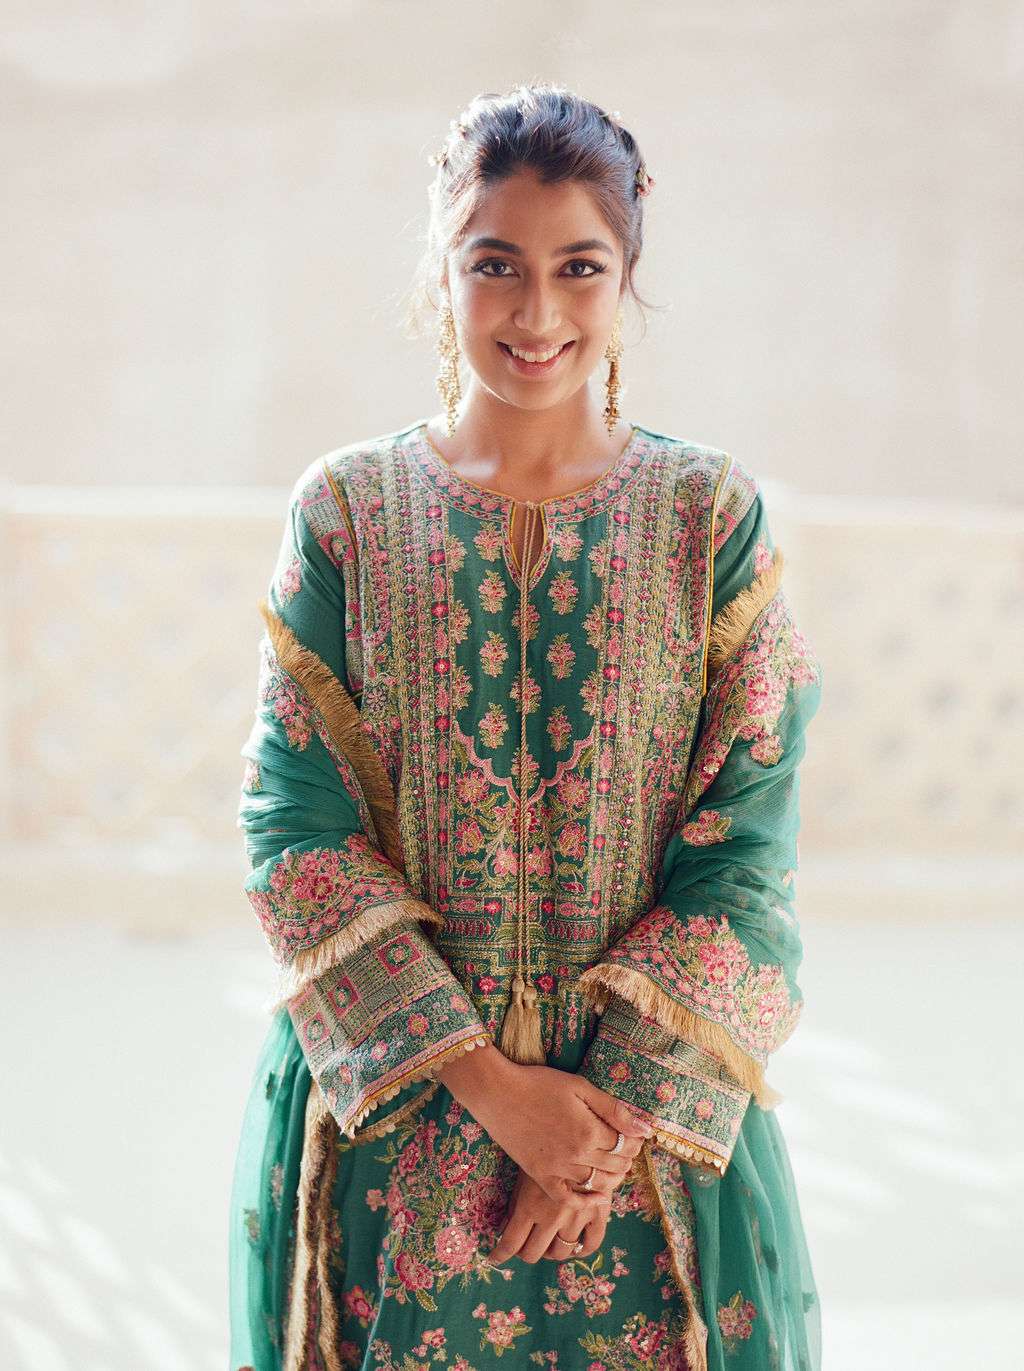 Neutral-Toned Wedding in Dubai Inspired by Their Indian & Pakistani ...